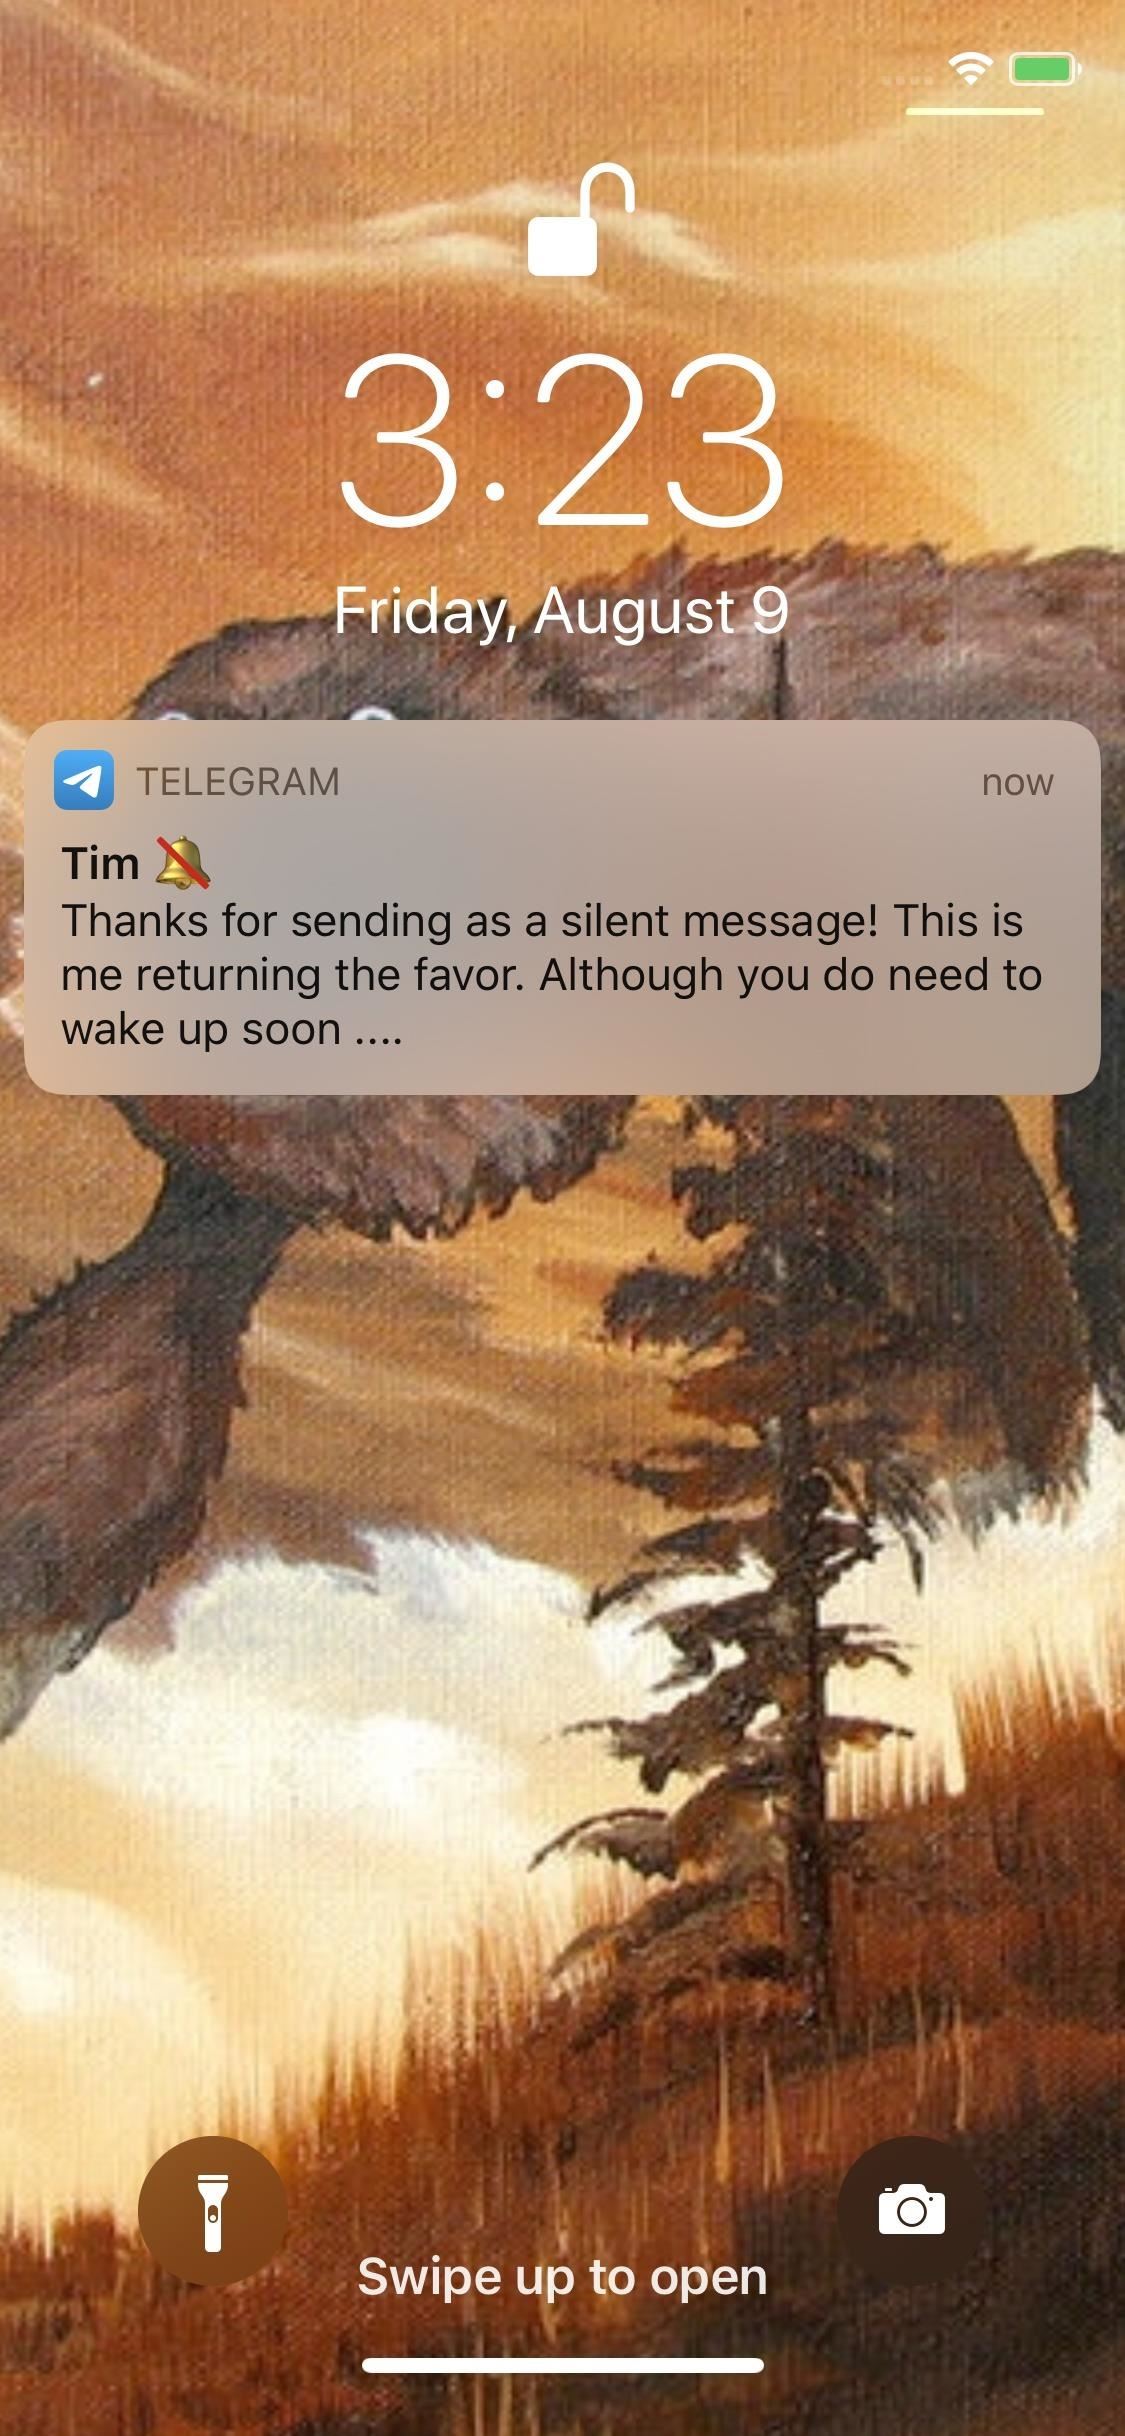 How to Silently Send Messages in Telegram to Avoid Waking Up or Disturbing Friends with Chats